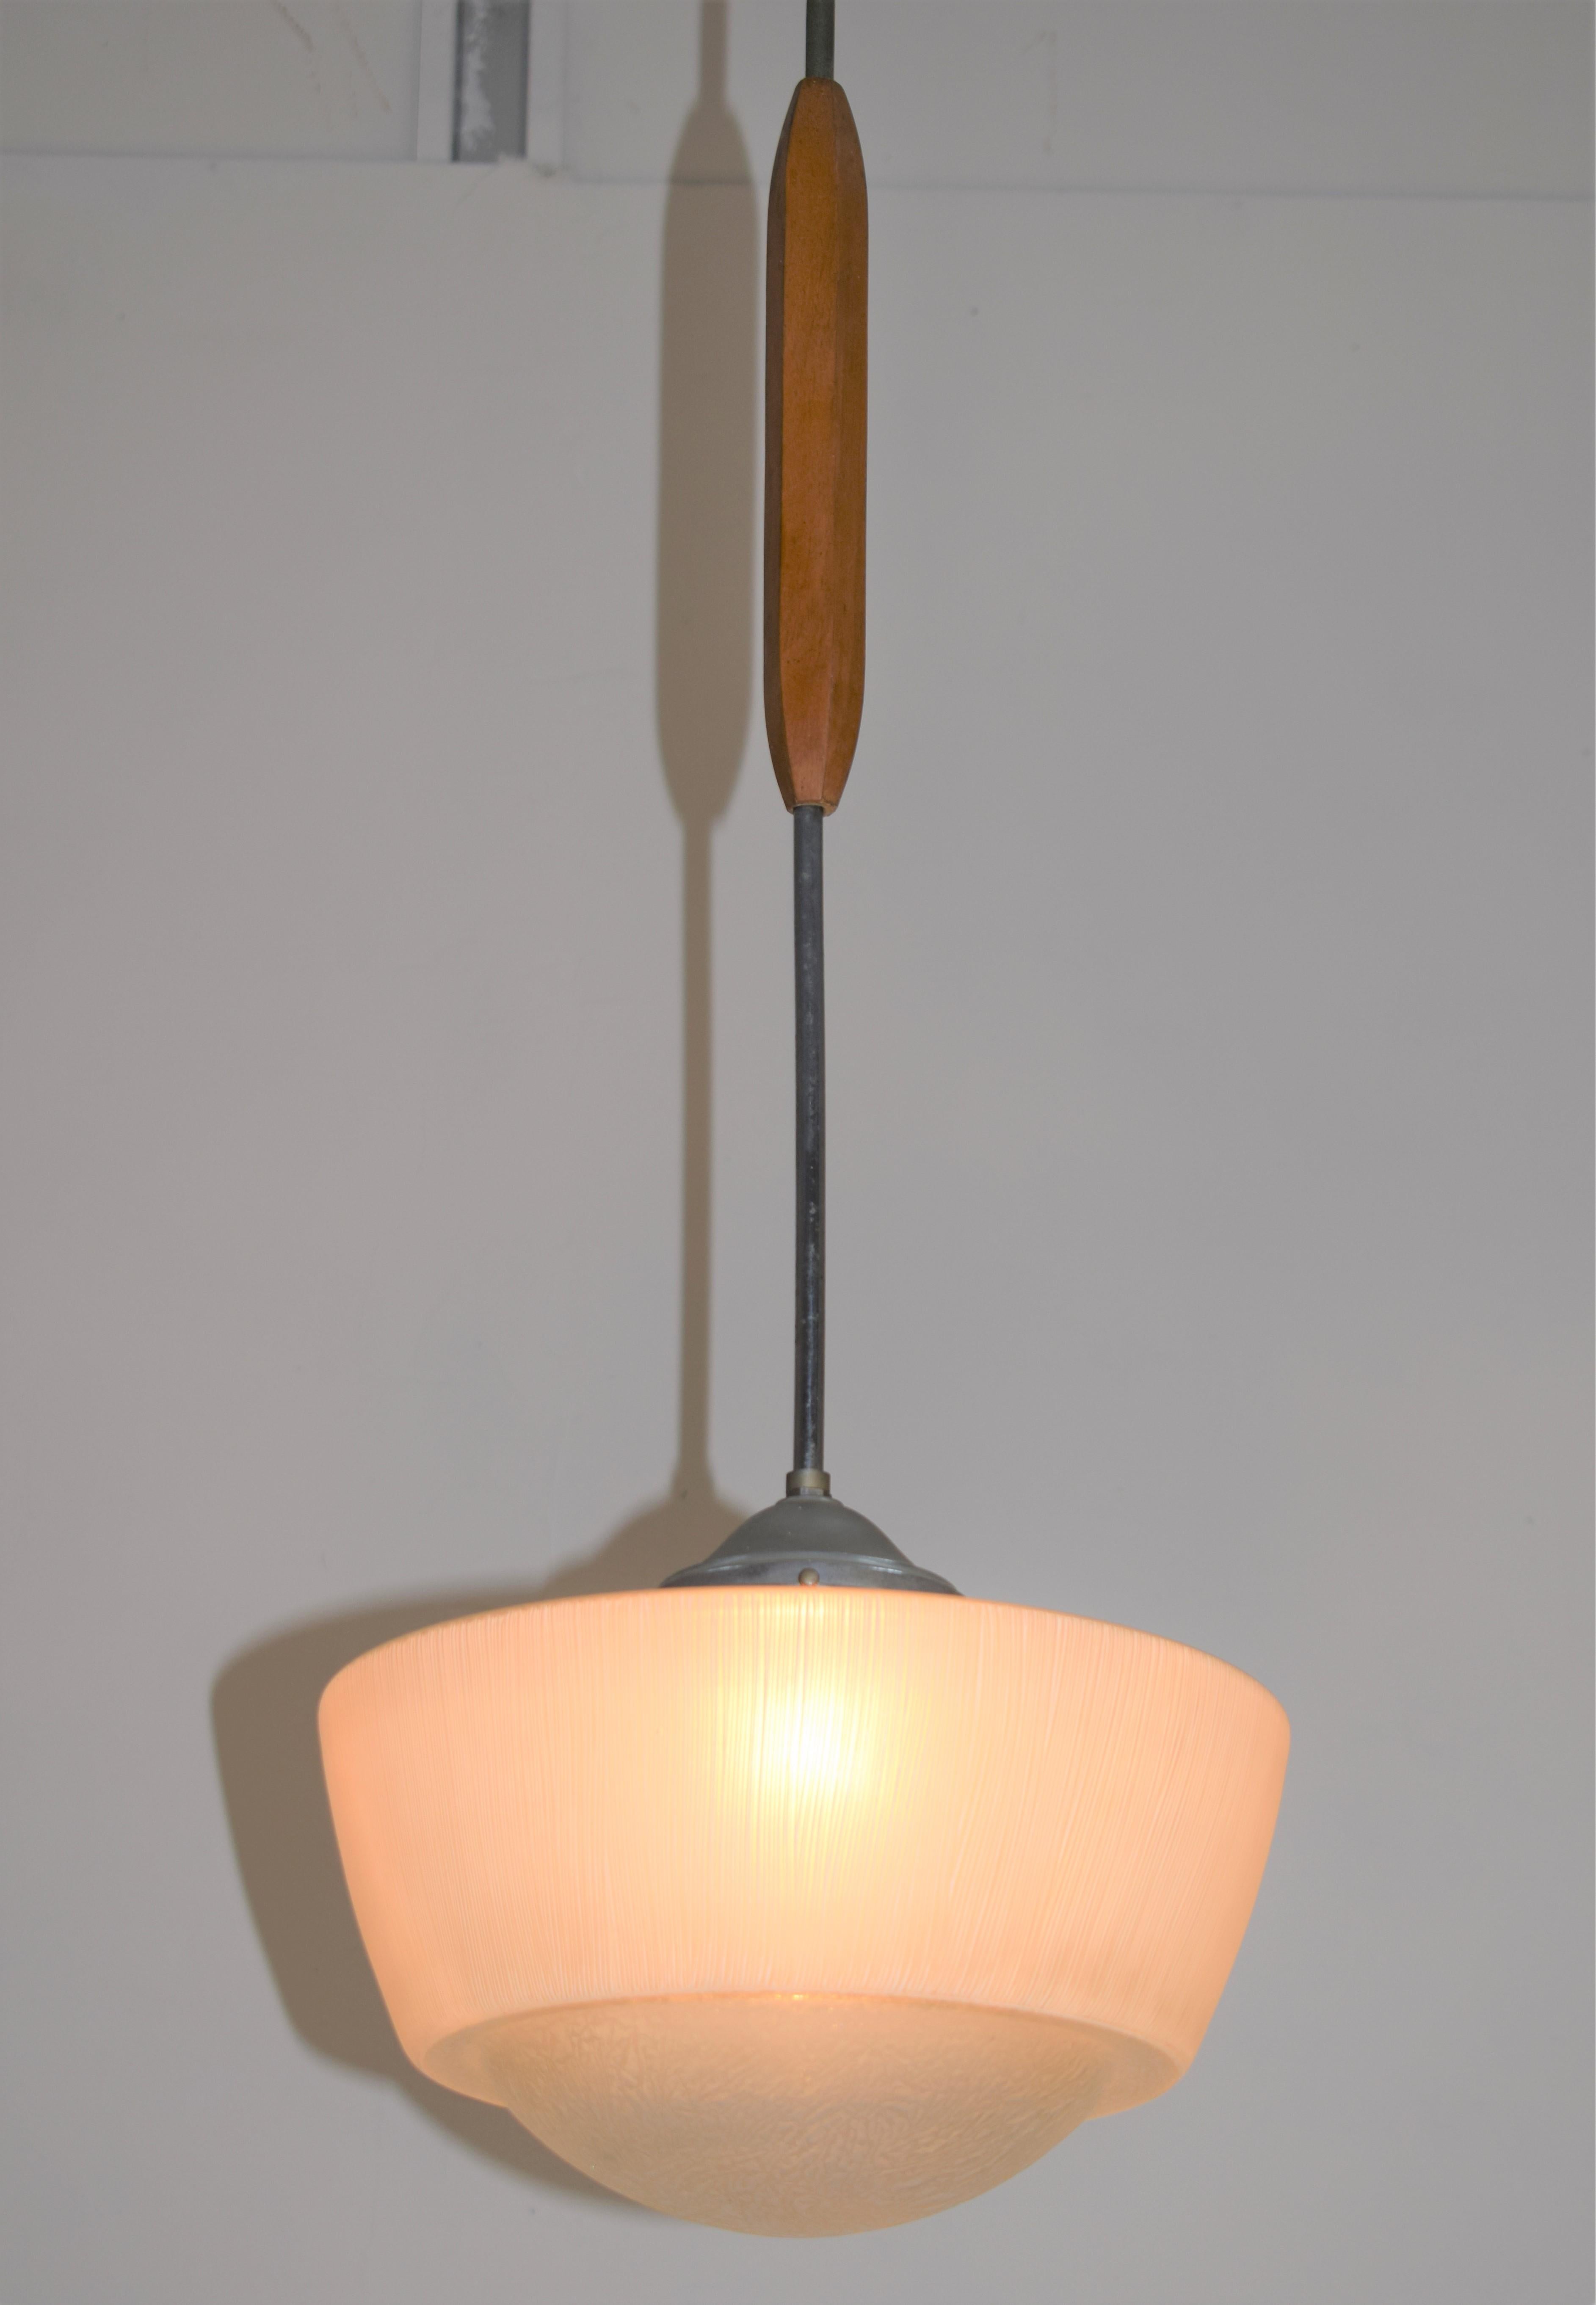 Italian chandelier, glass, metal and wood, 1960s.

Dimensions: H= 110 cm; D= 30 cm.